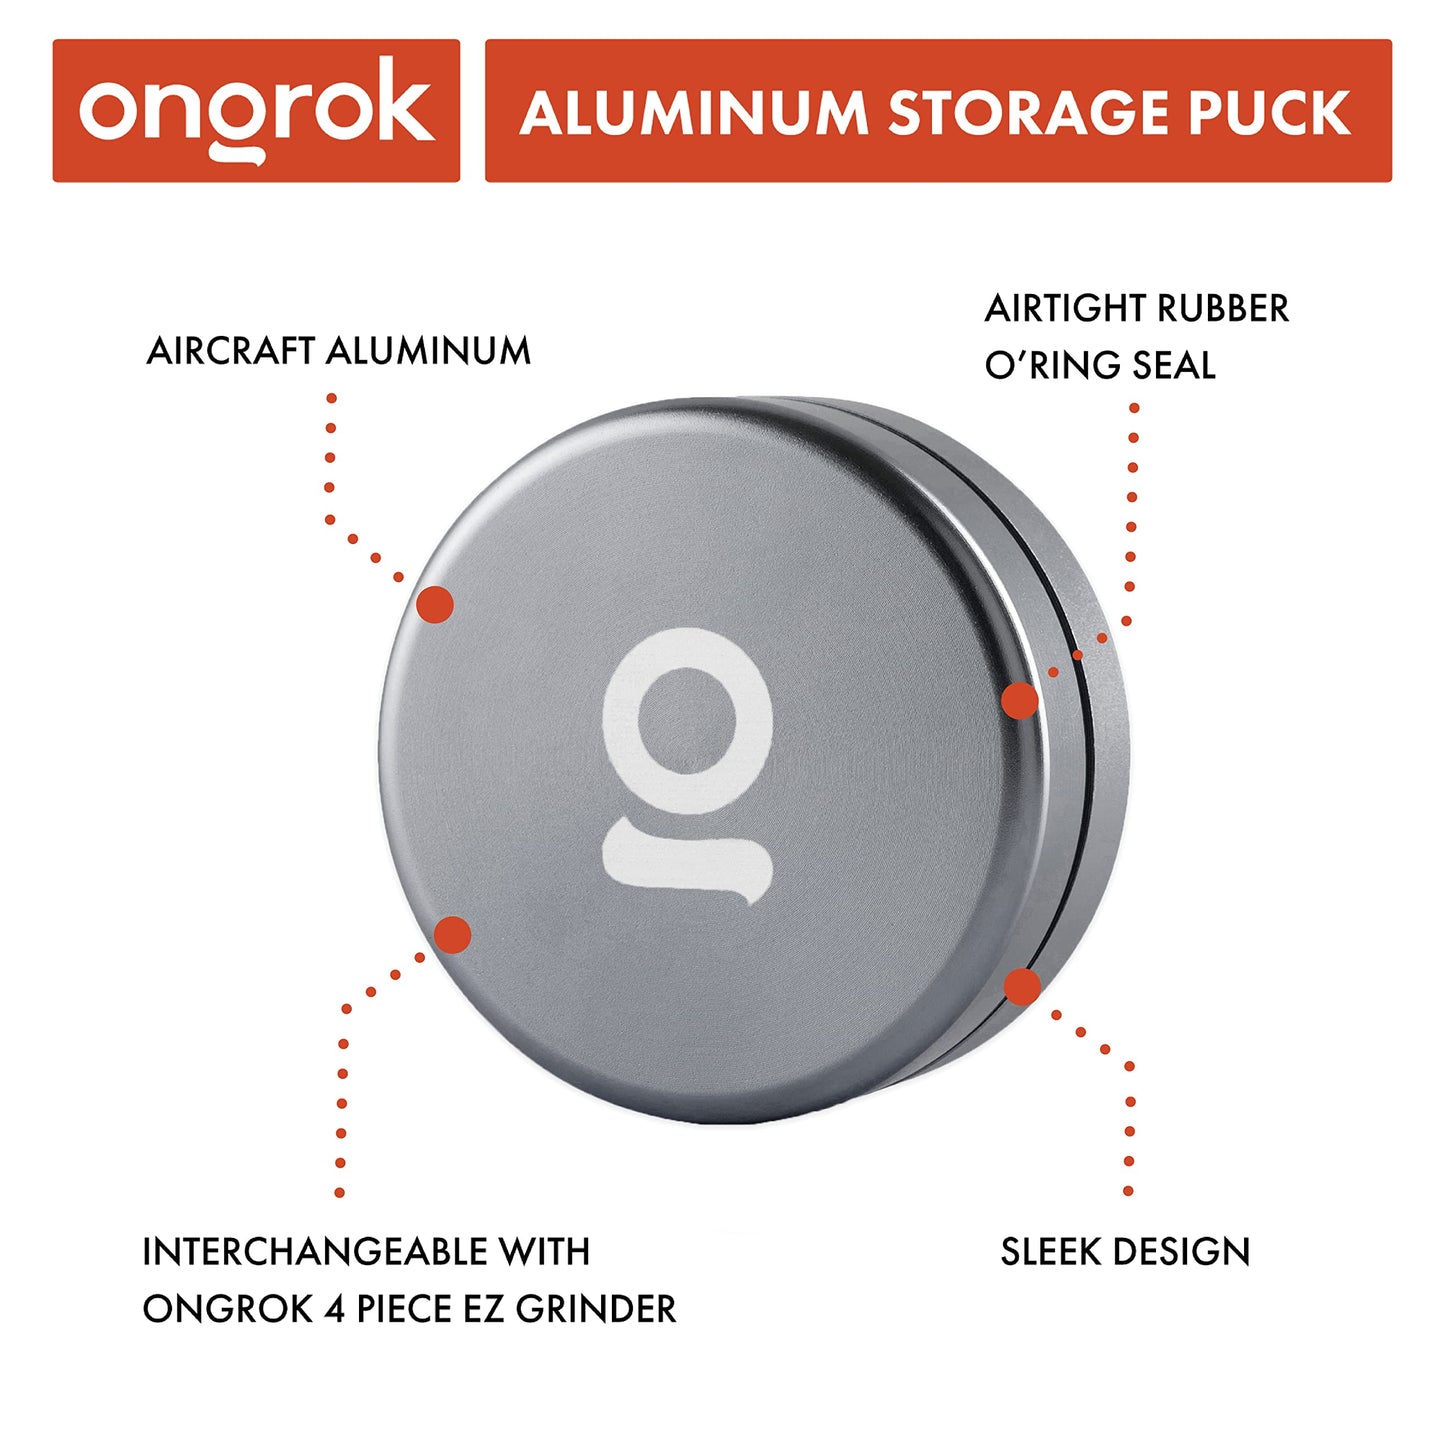 ONGROK Storage Puck, Gold, Perfect Size Case to Store in Your Pocket, Airtight, Preserves Moisture Profile, Smell and Aroma